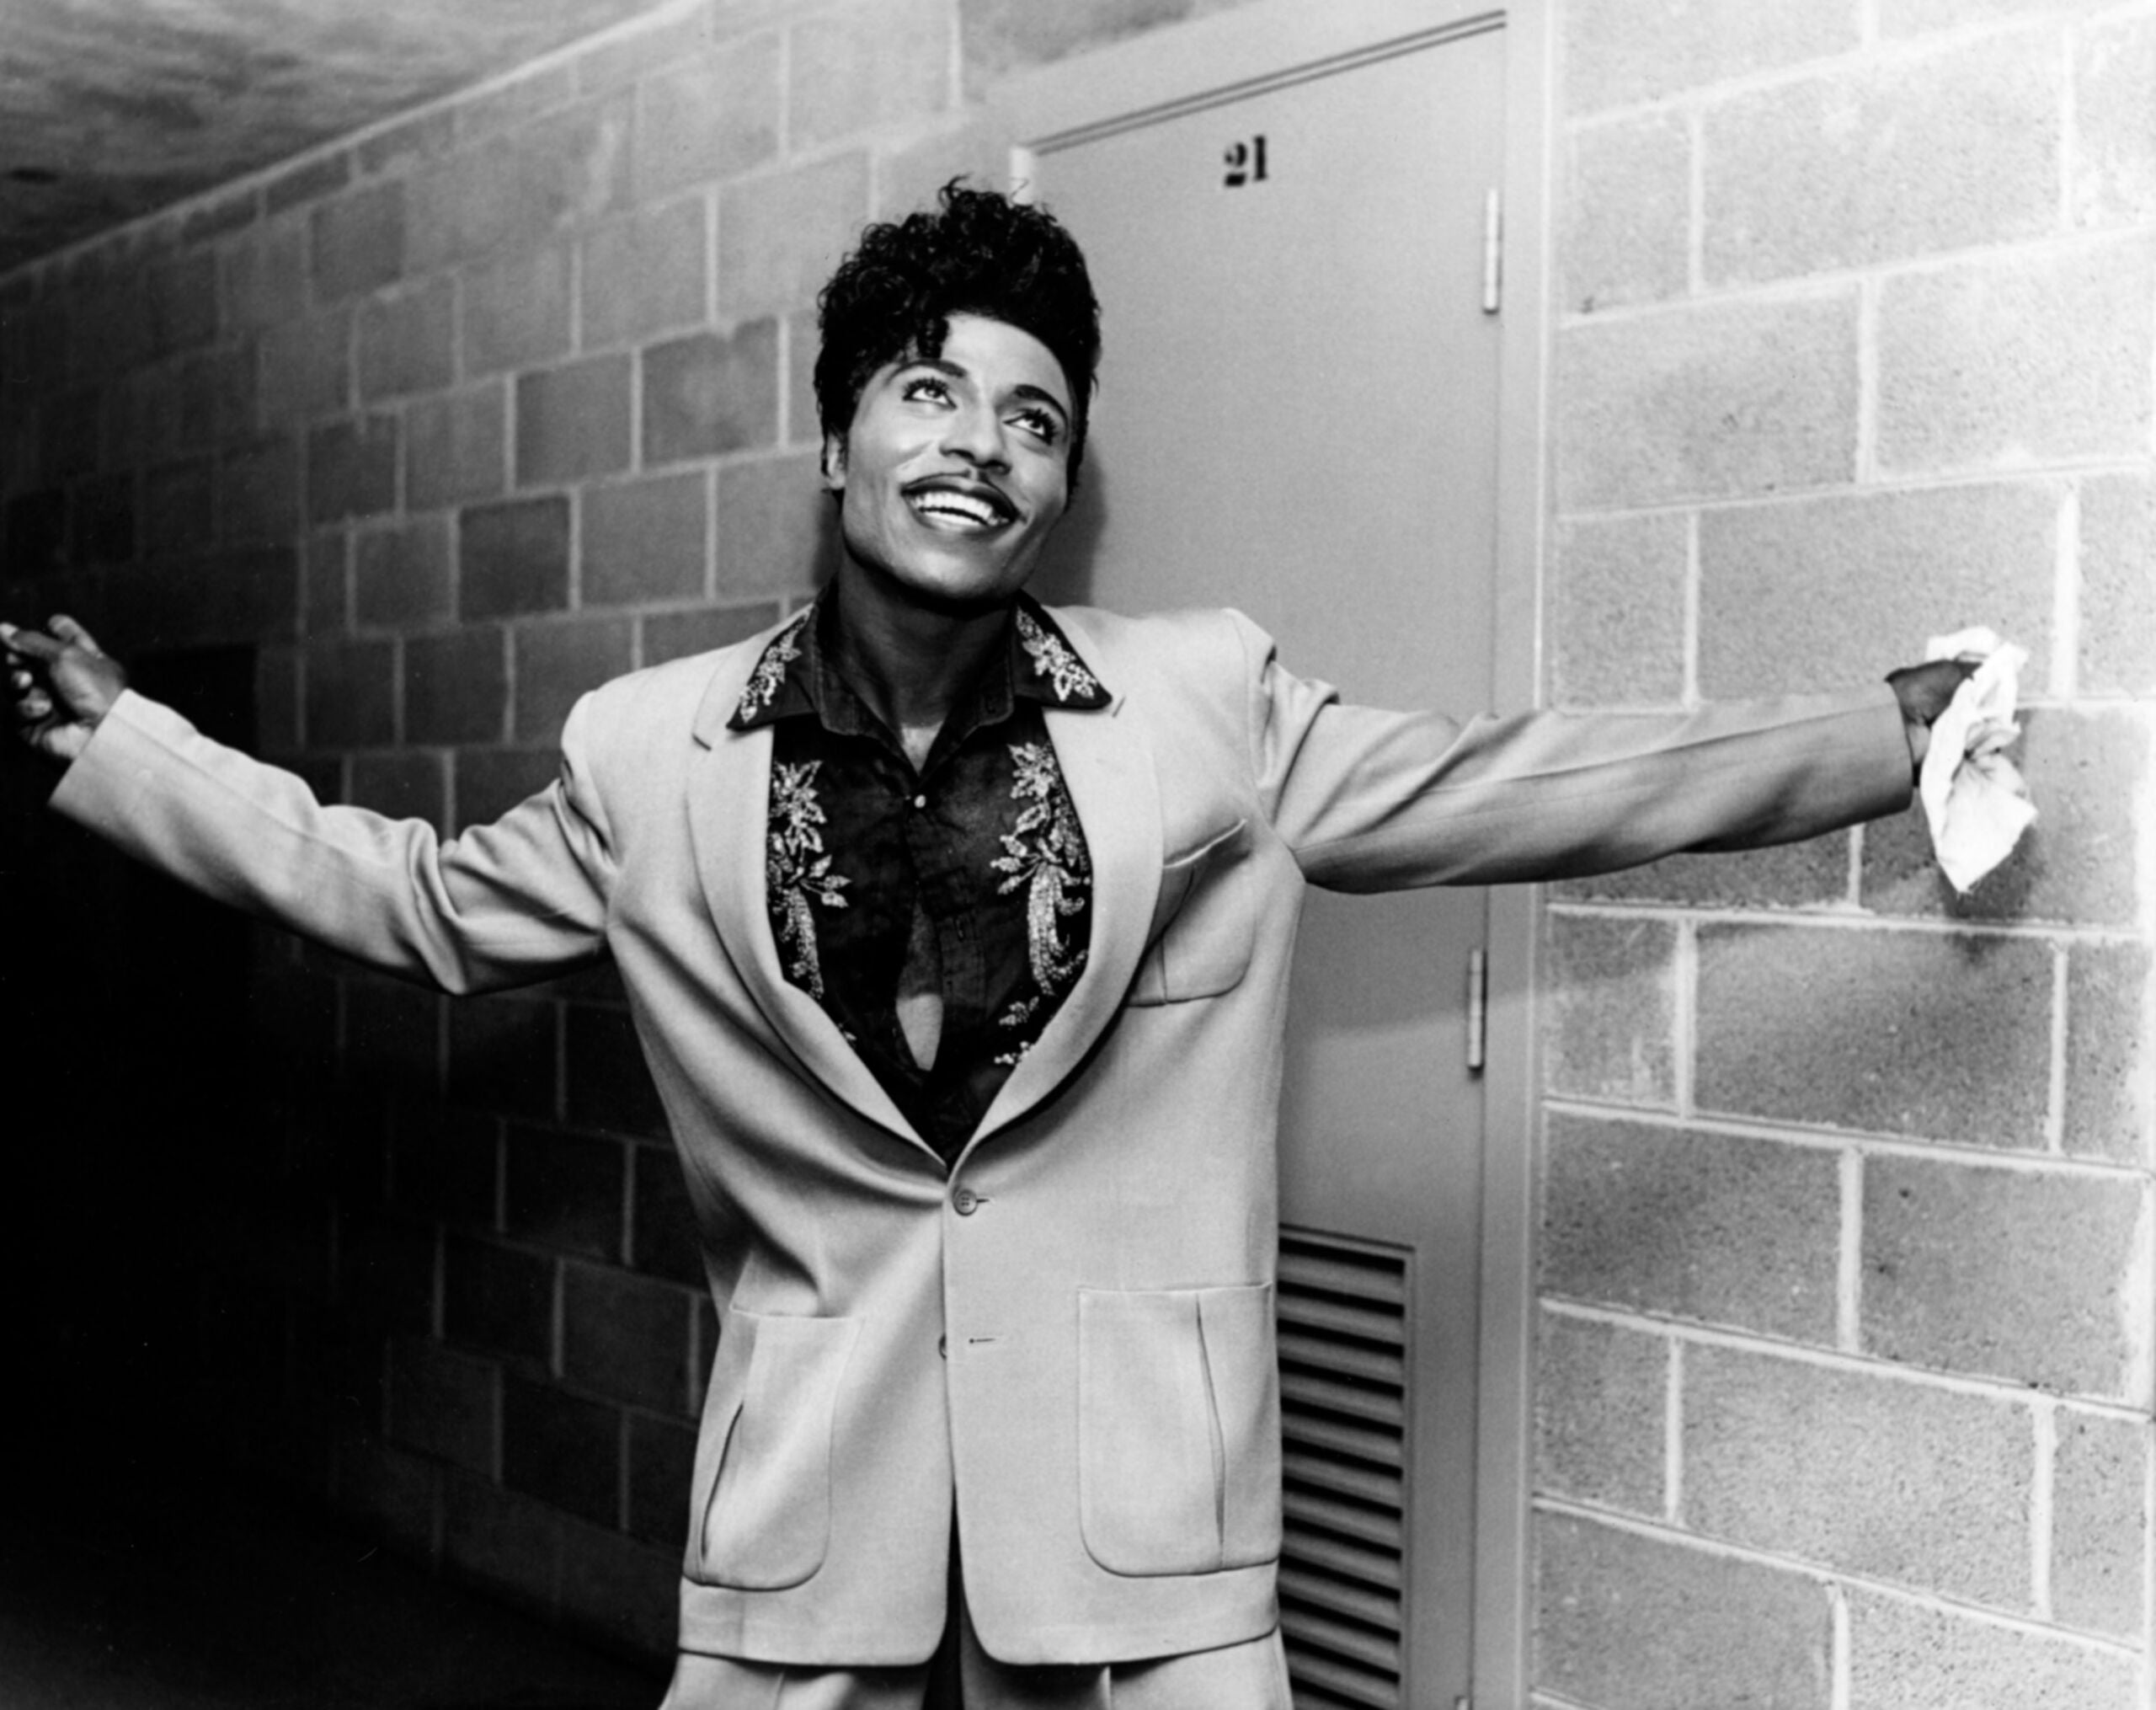 Singer Bobby Rush On Little Richard’s Impact, Influence, And Cultural Legacy